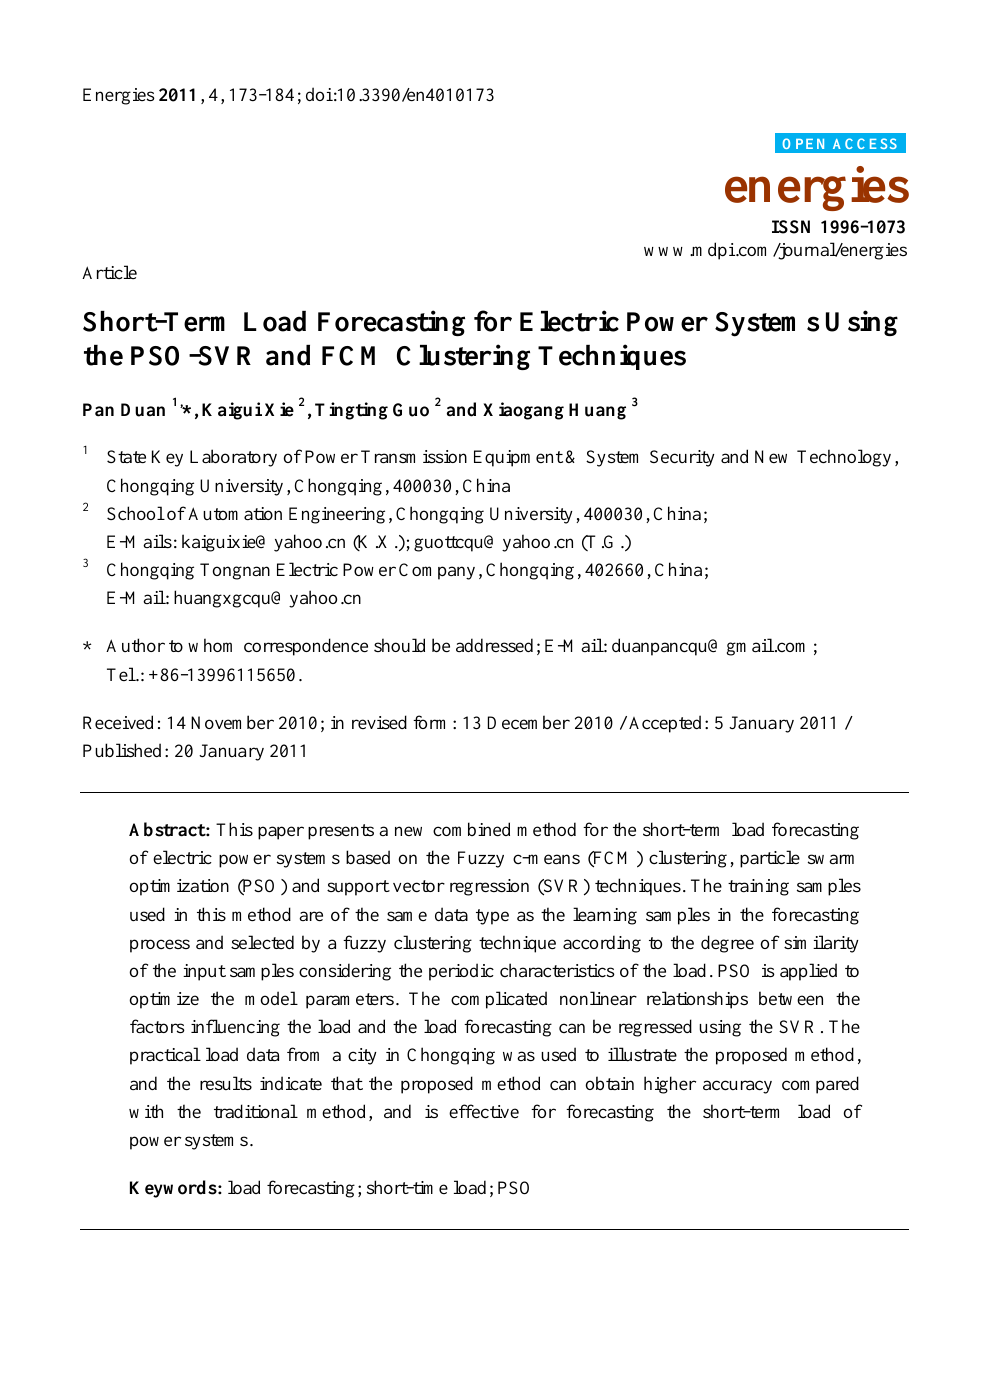 Short Term Load Forecasting For Electric Power Systems Using The Pso Svr And Fcm Clustering Techniques Topic Of Research Paper In Mathematics Download Scholarly Article Pdf And Read For Free On Cyberleninka Open